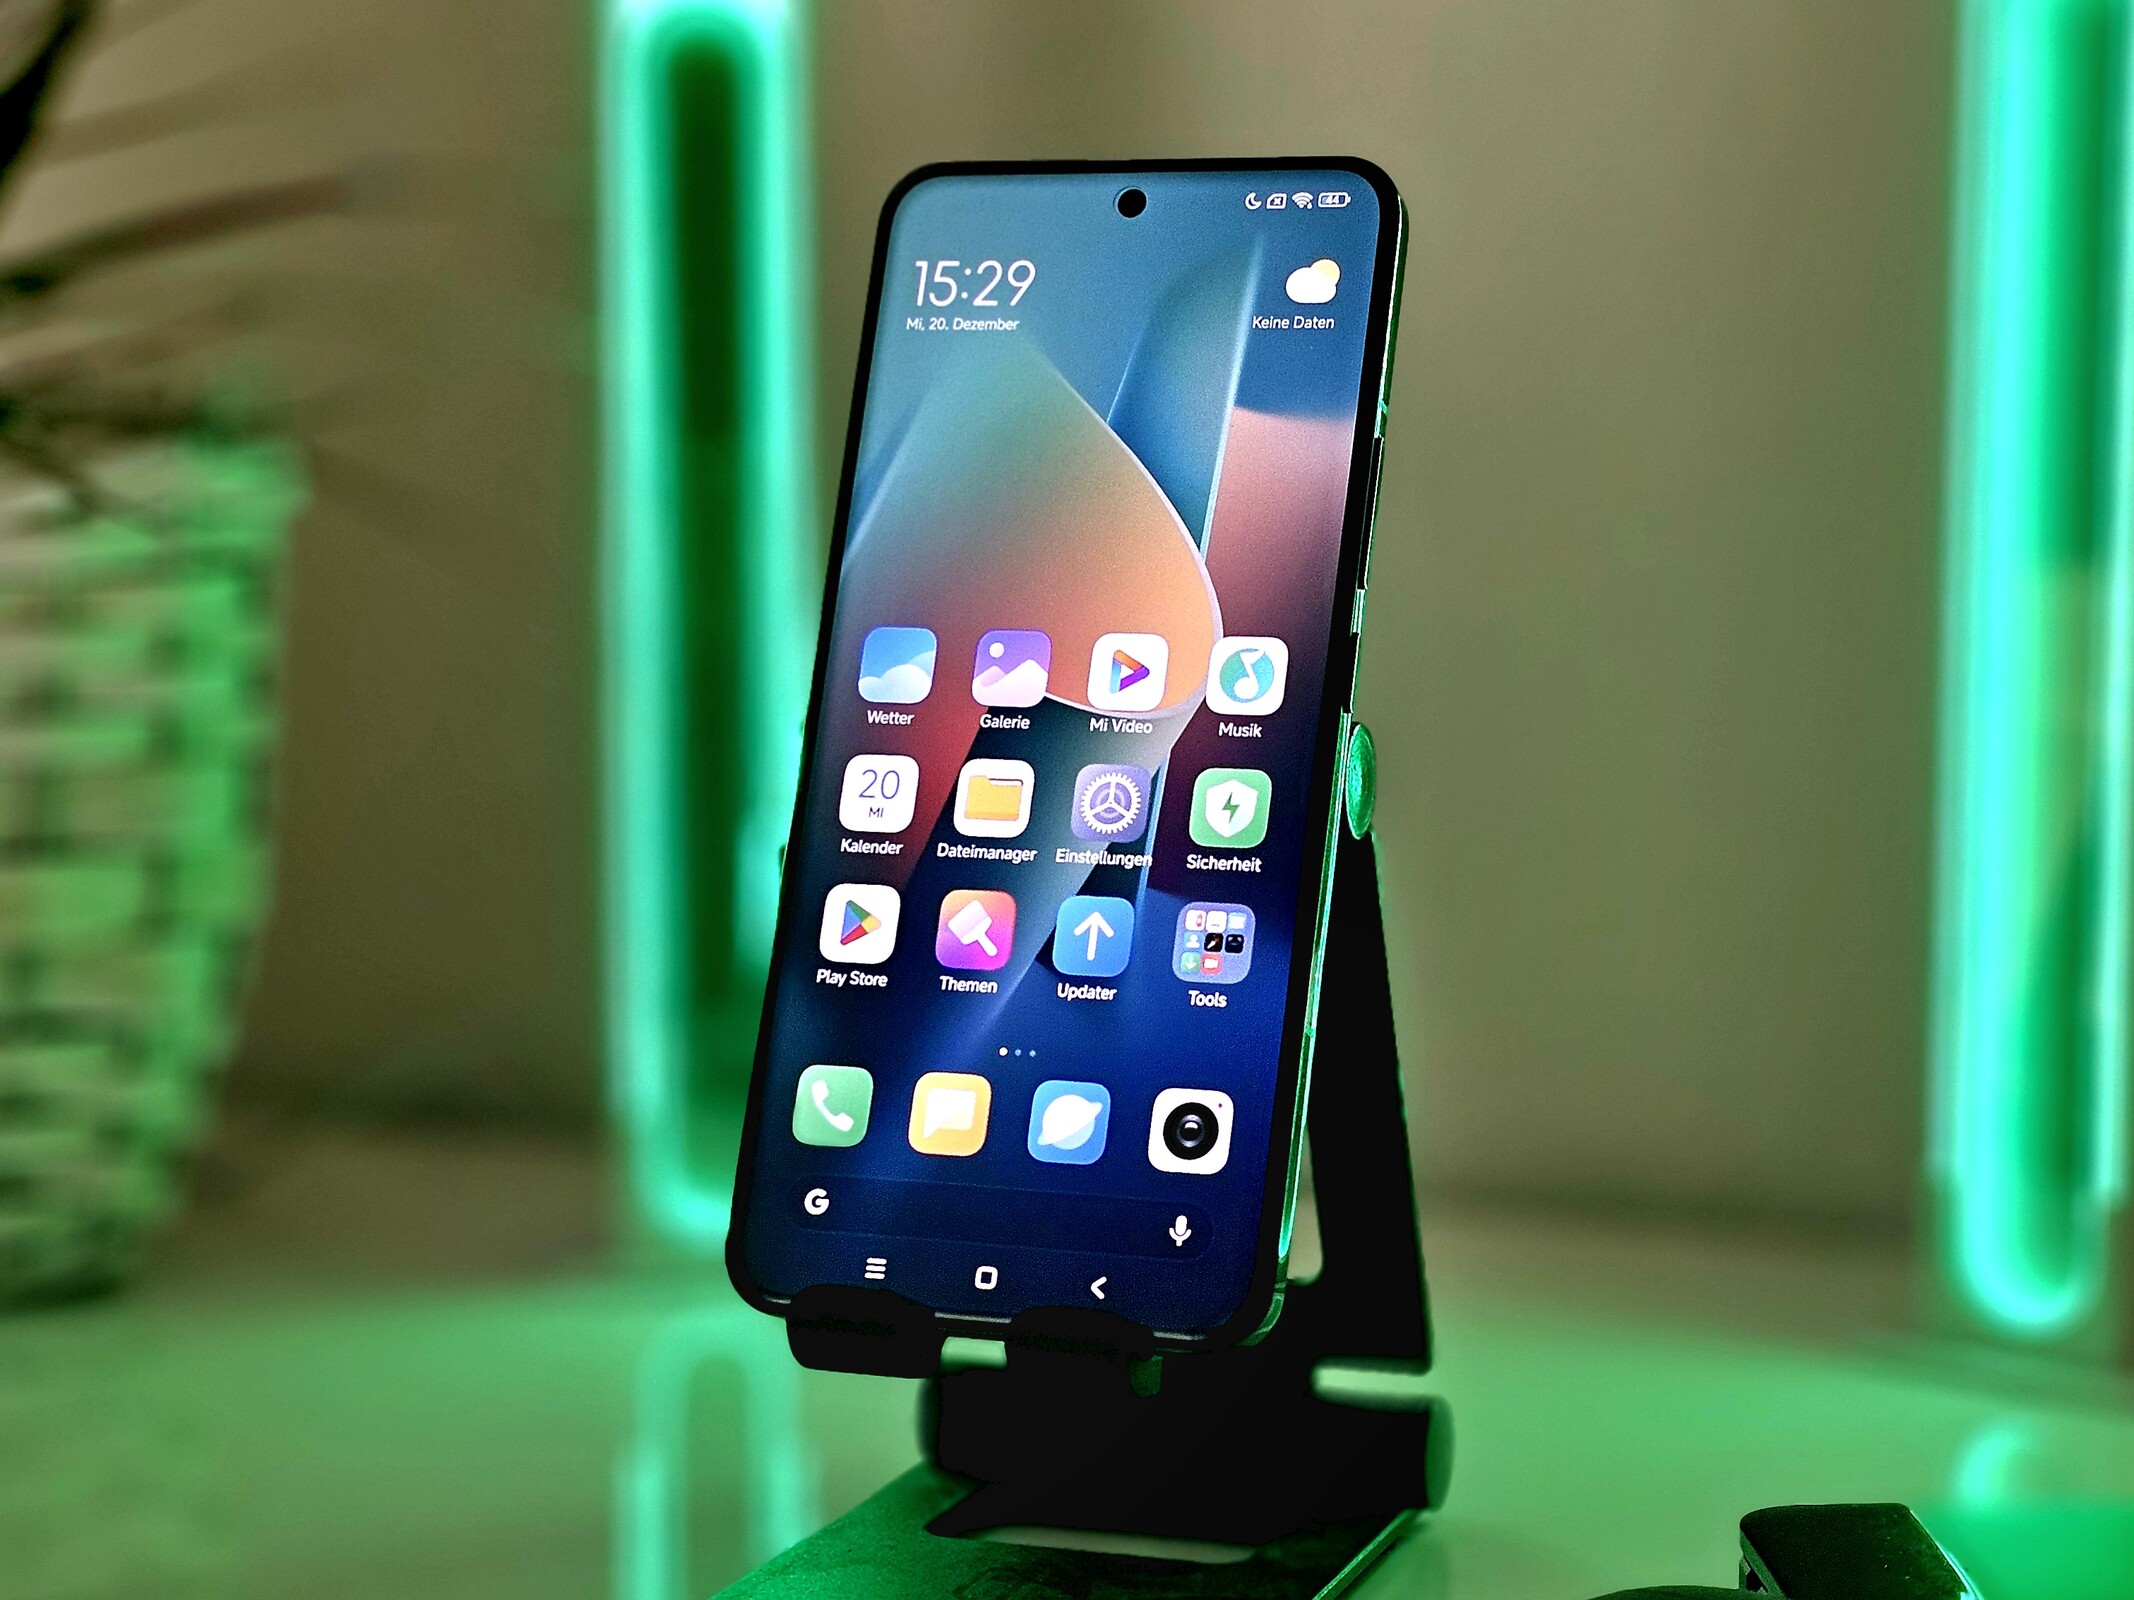 Xiaomi 14 Pro Vs Xiaomi 13 Pro: Does Snapdragon 8 Gen 3 Make The New Model  The Best One Yet?